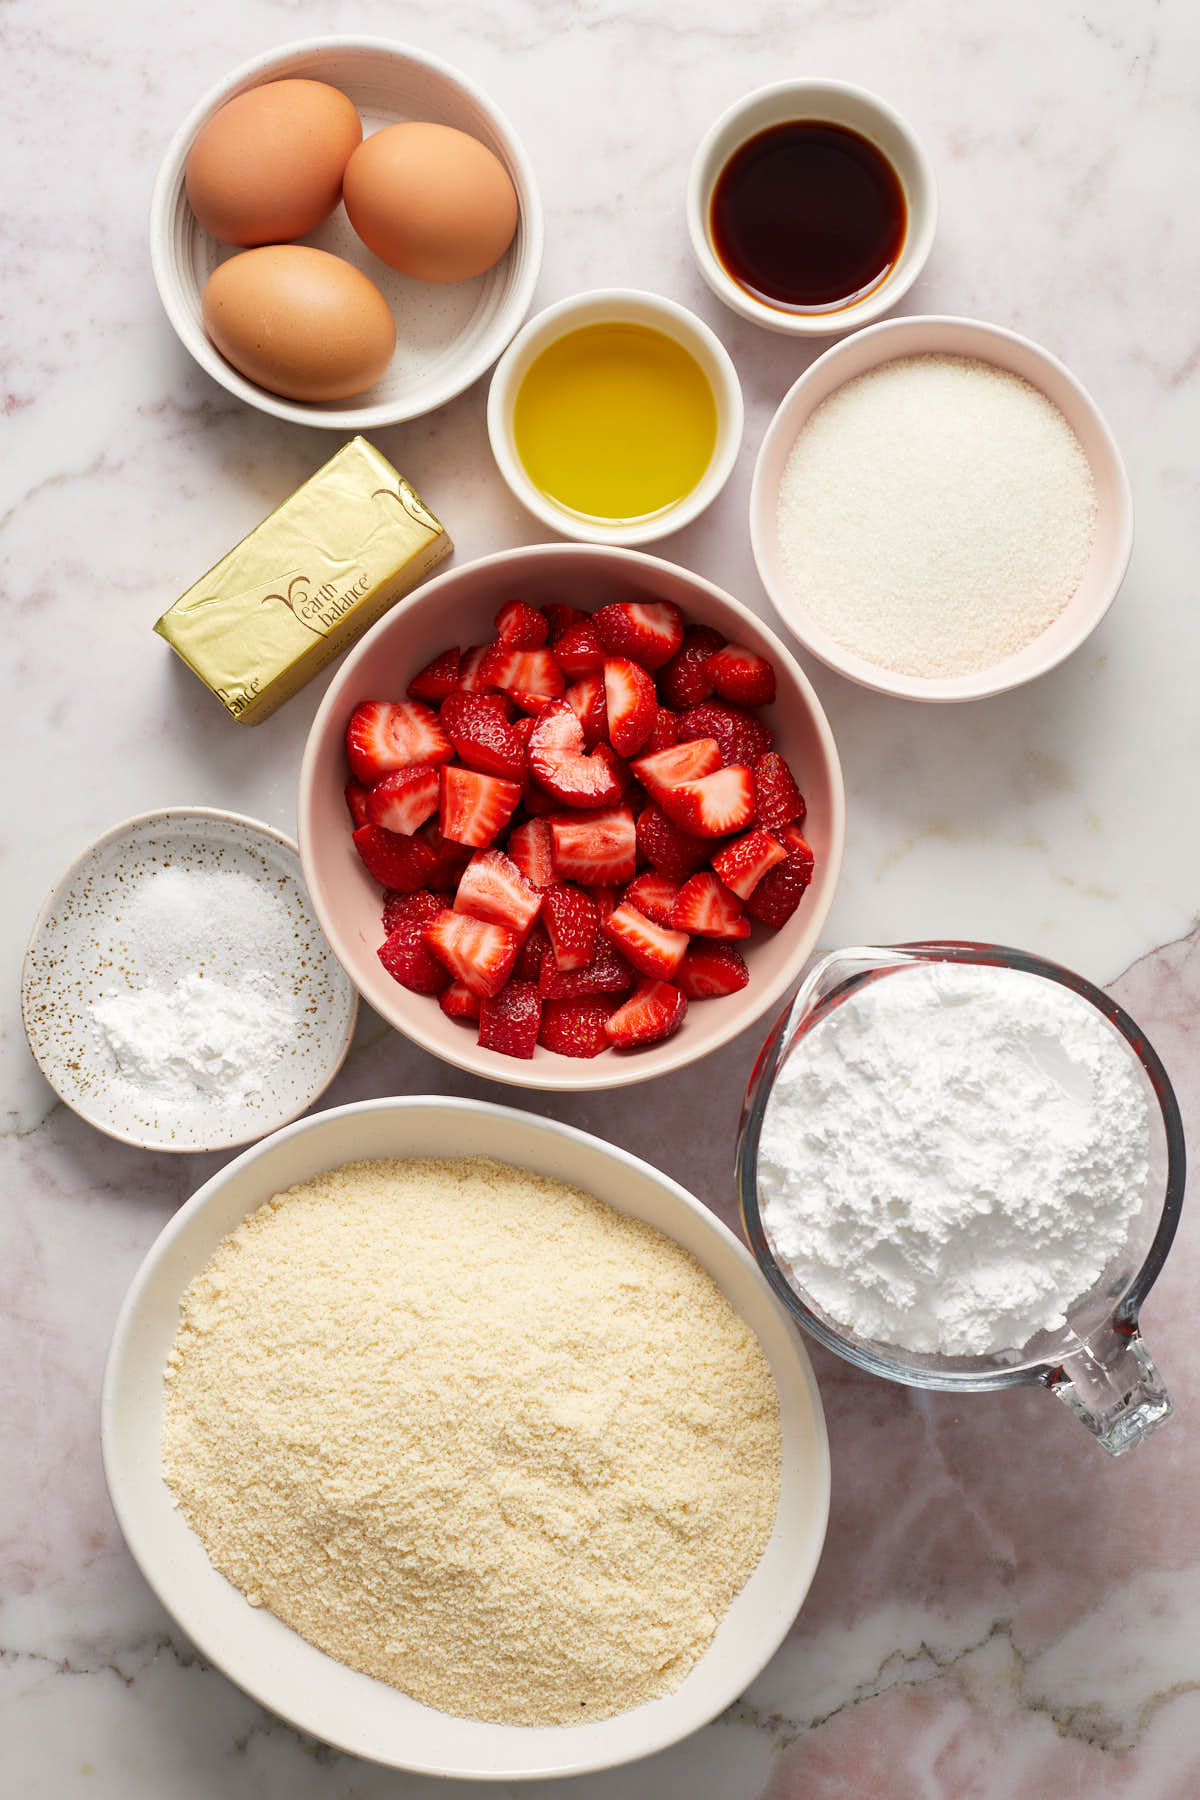 Ingredients to make almond flour strawberry cake arranged in individual dishes.